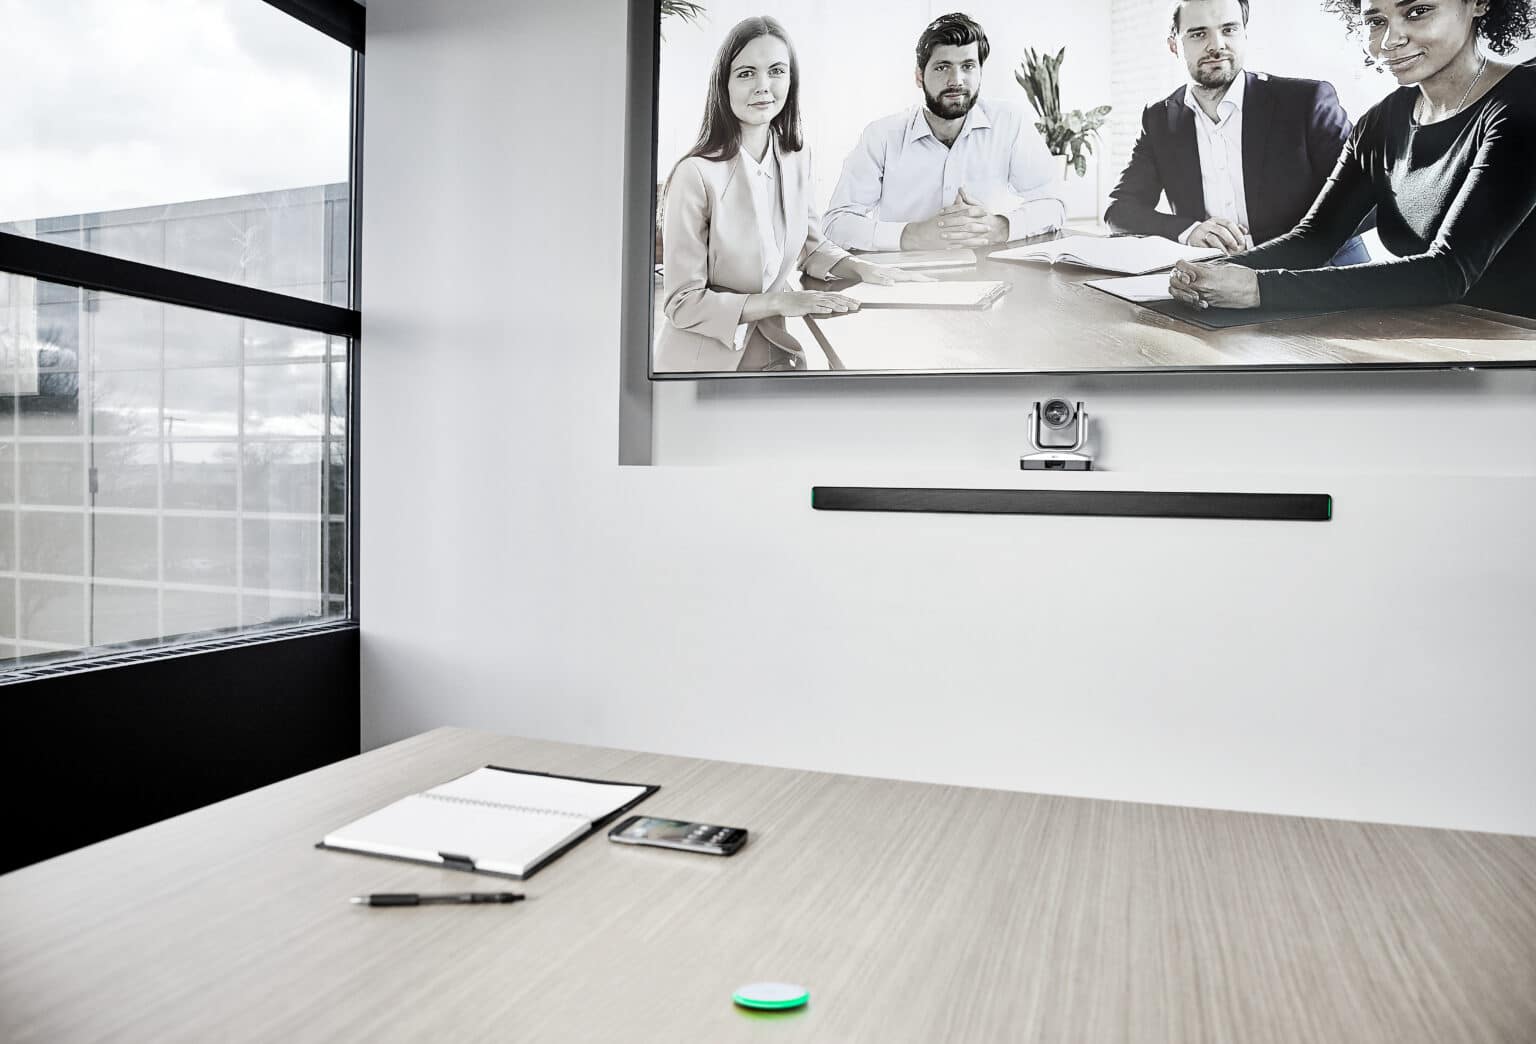 meeting space with MXA710 linear array microphone mounted on wall beneath display and MXA-NMB on the work table